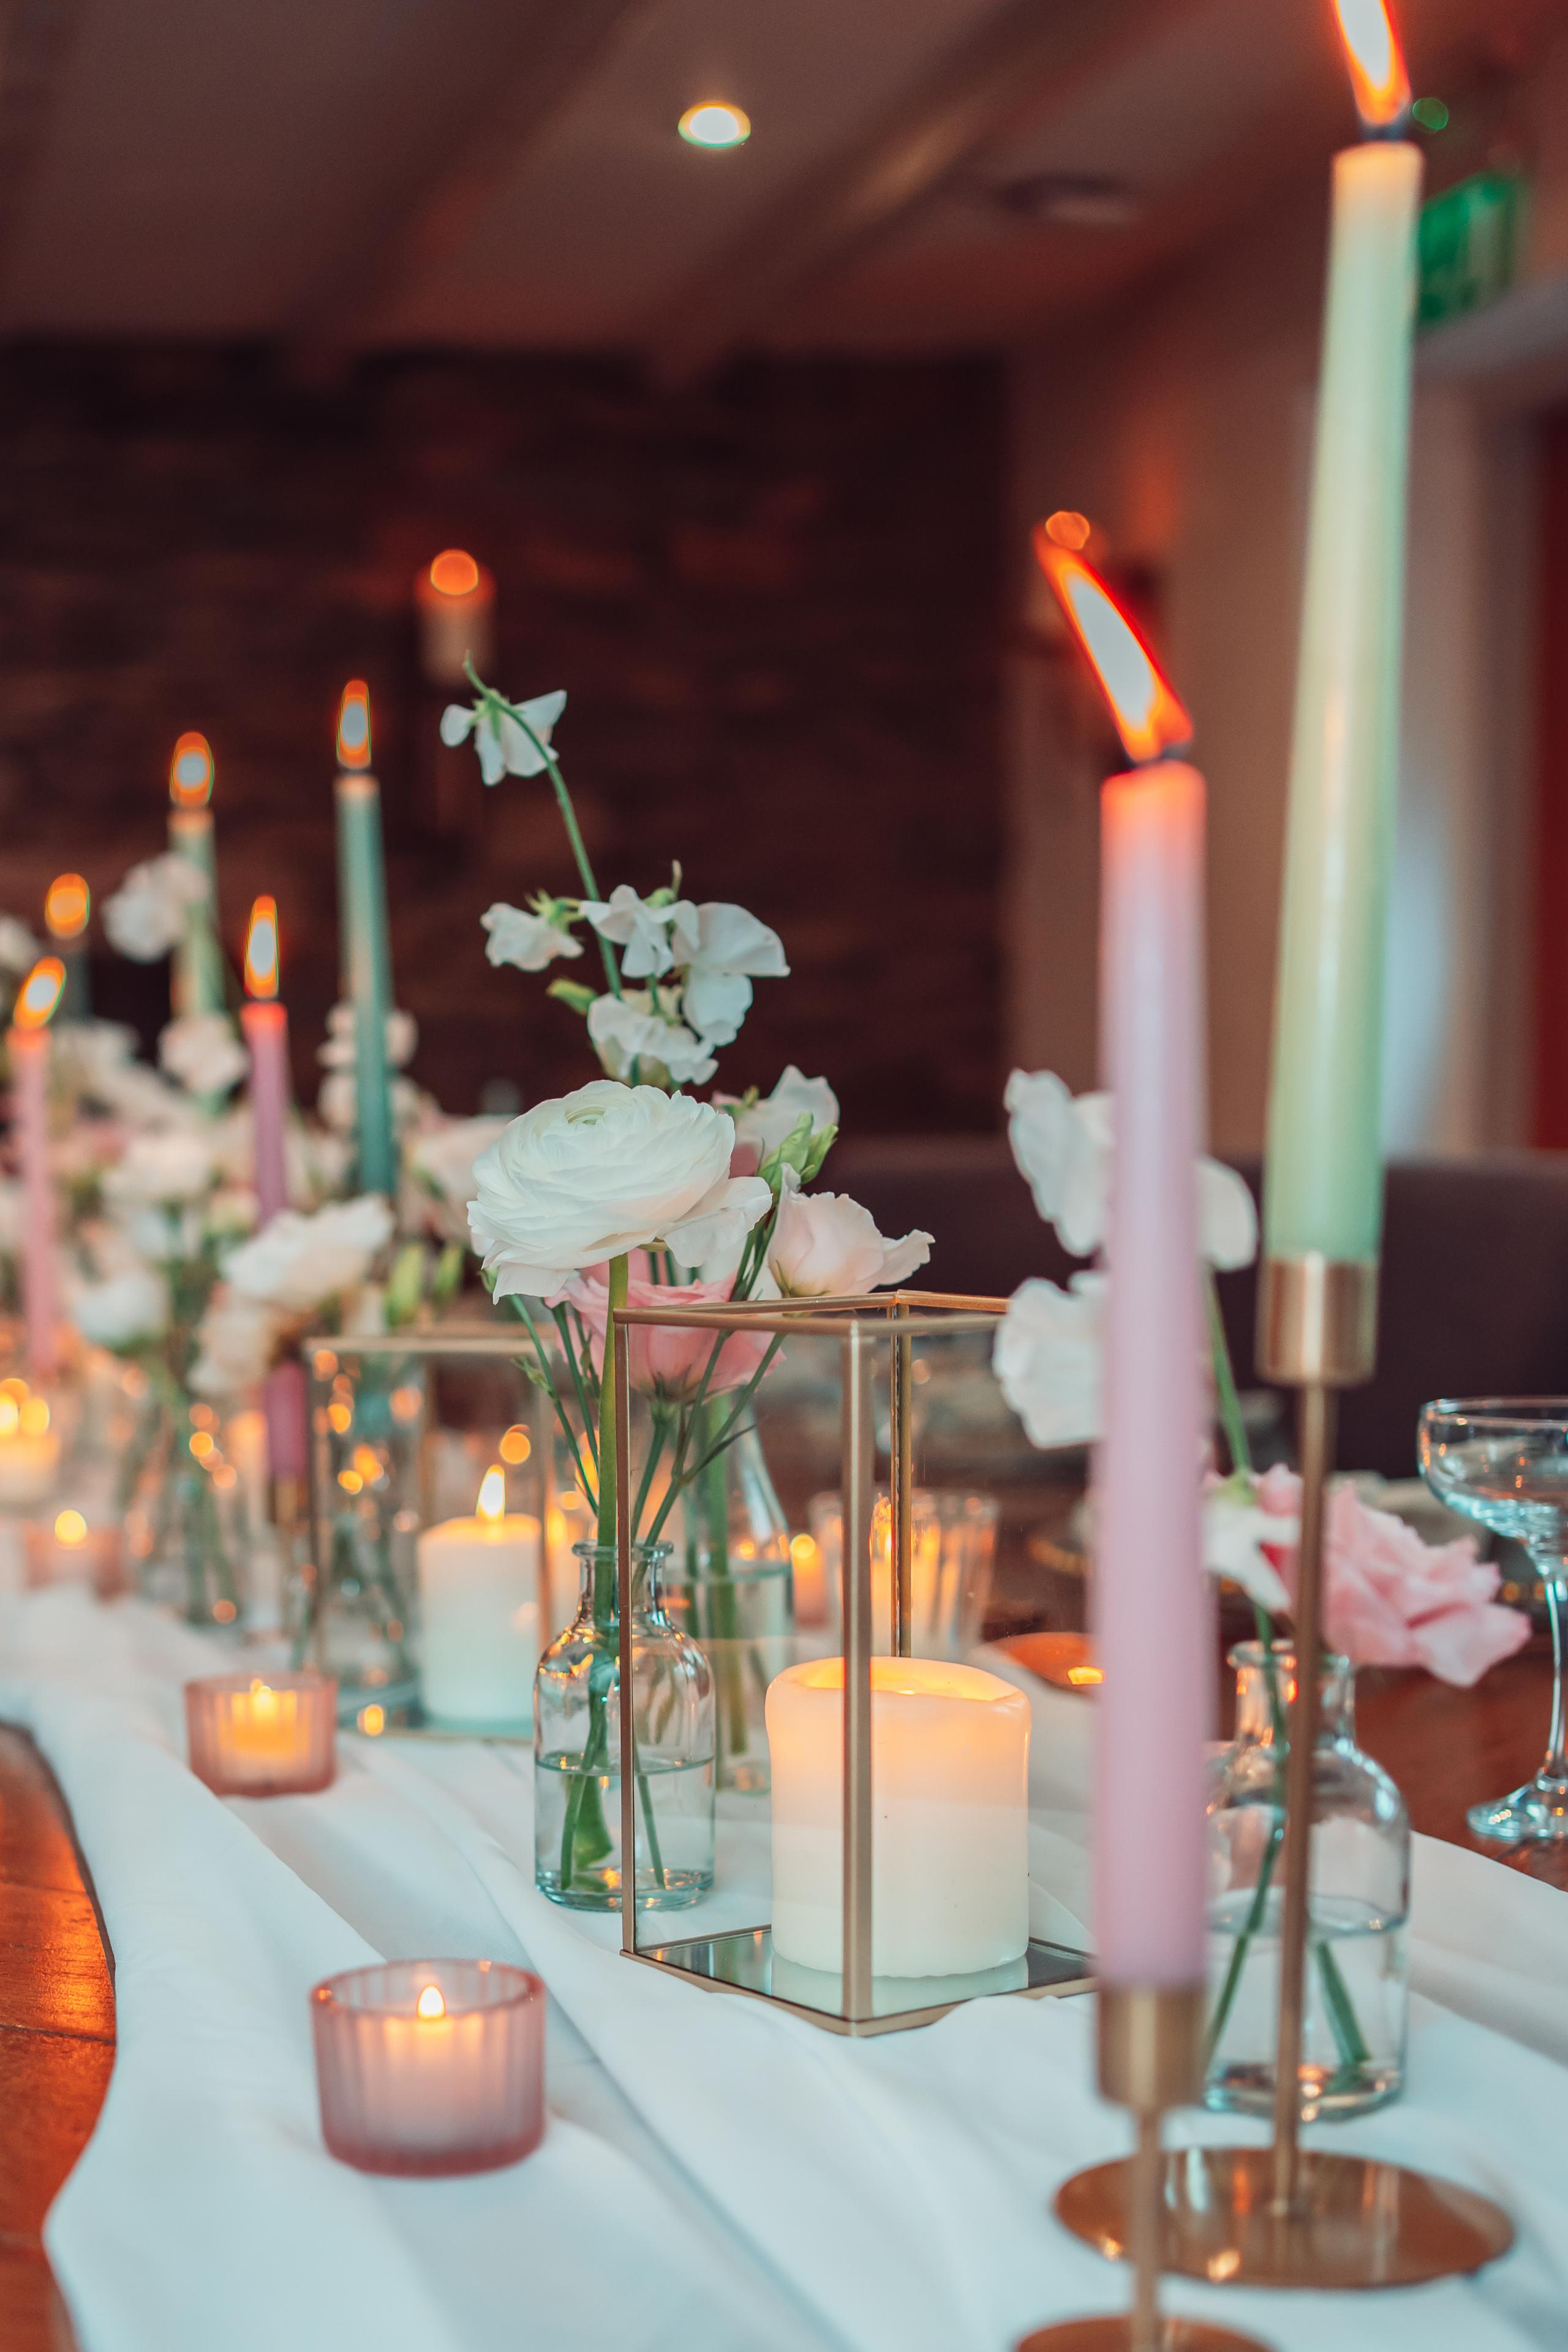 @sittingprettycumbria - Styling (Table Runner + Candles)   @westviewphoto21 - Photographer